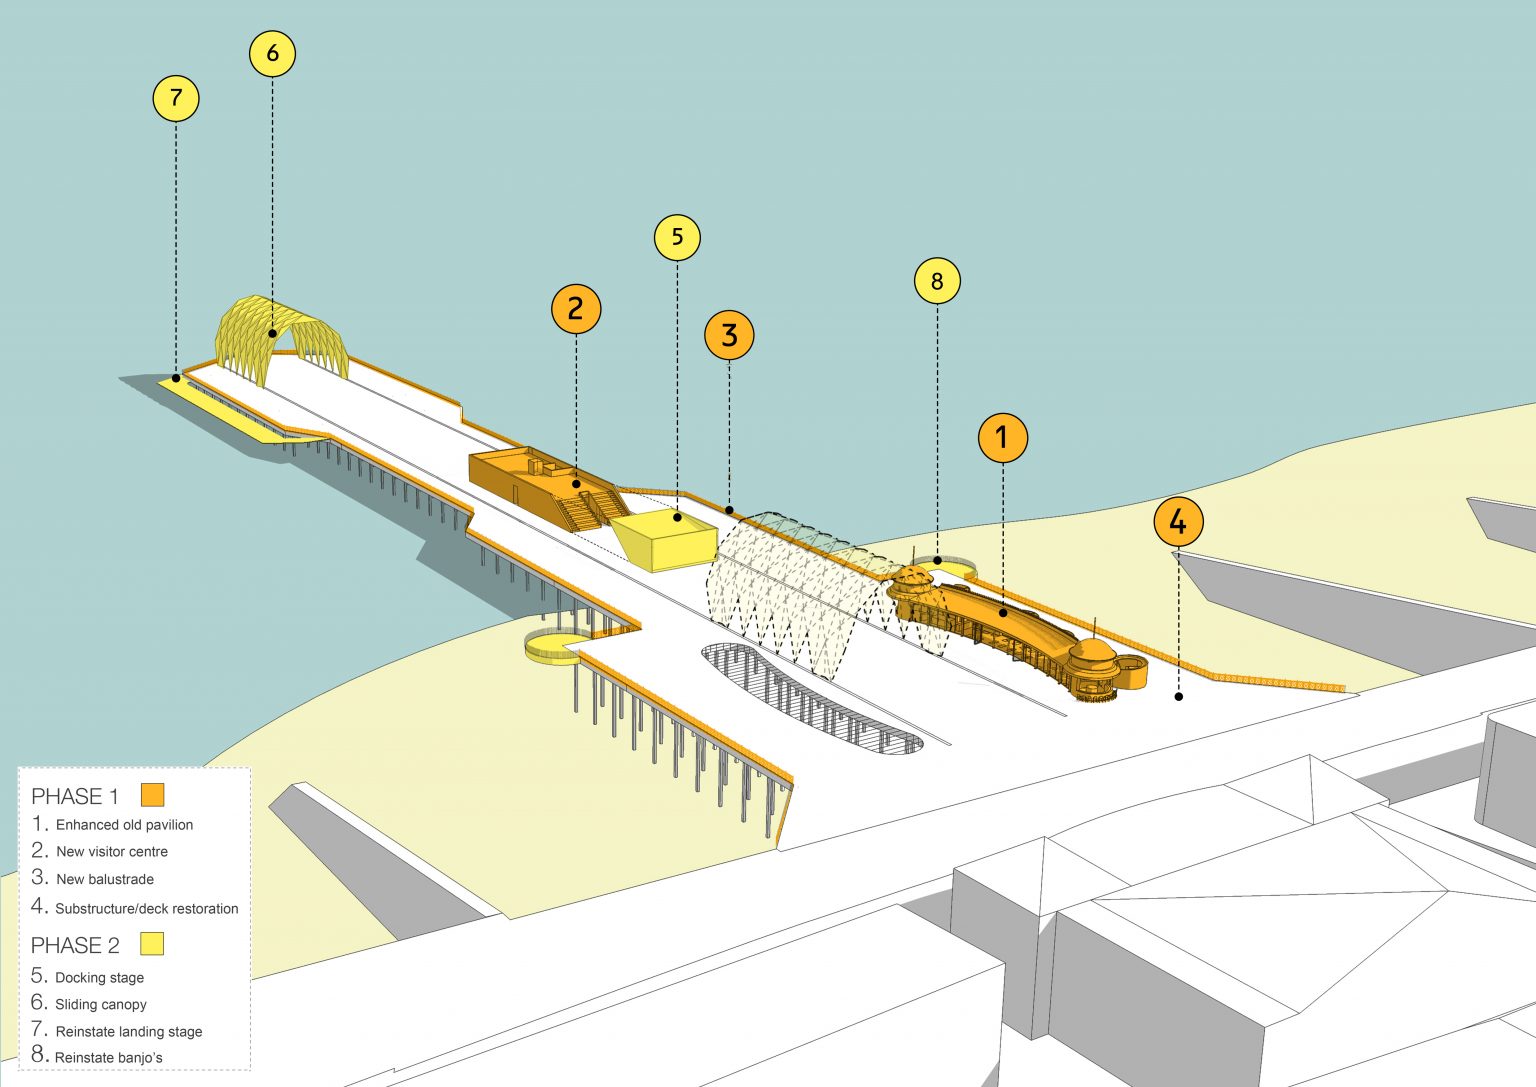 Diagram showing future phases for Hastings Pier